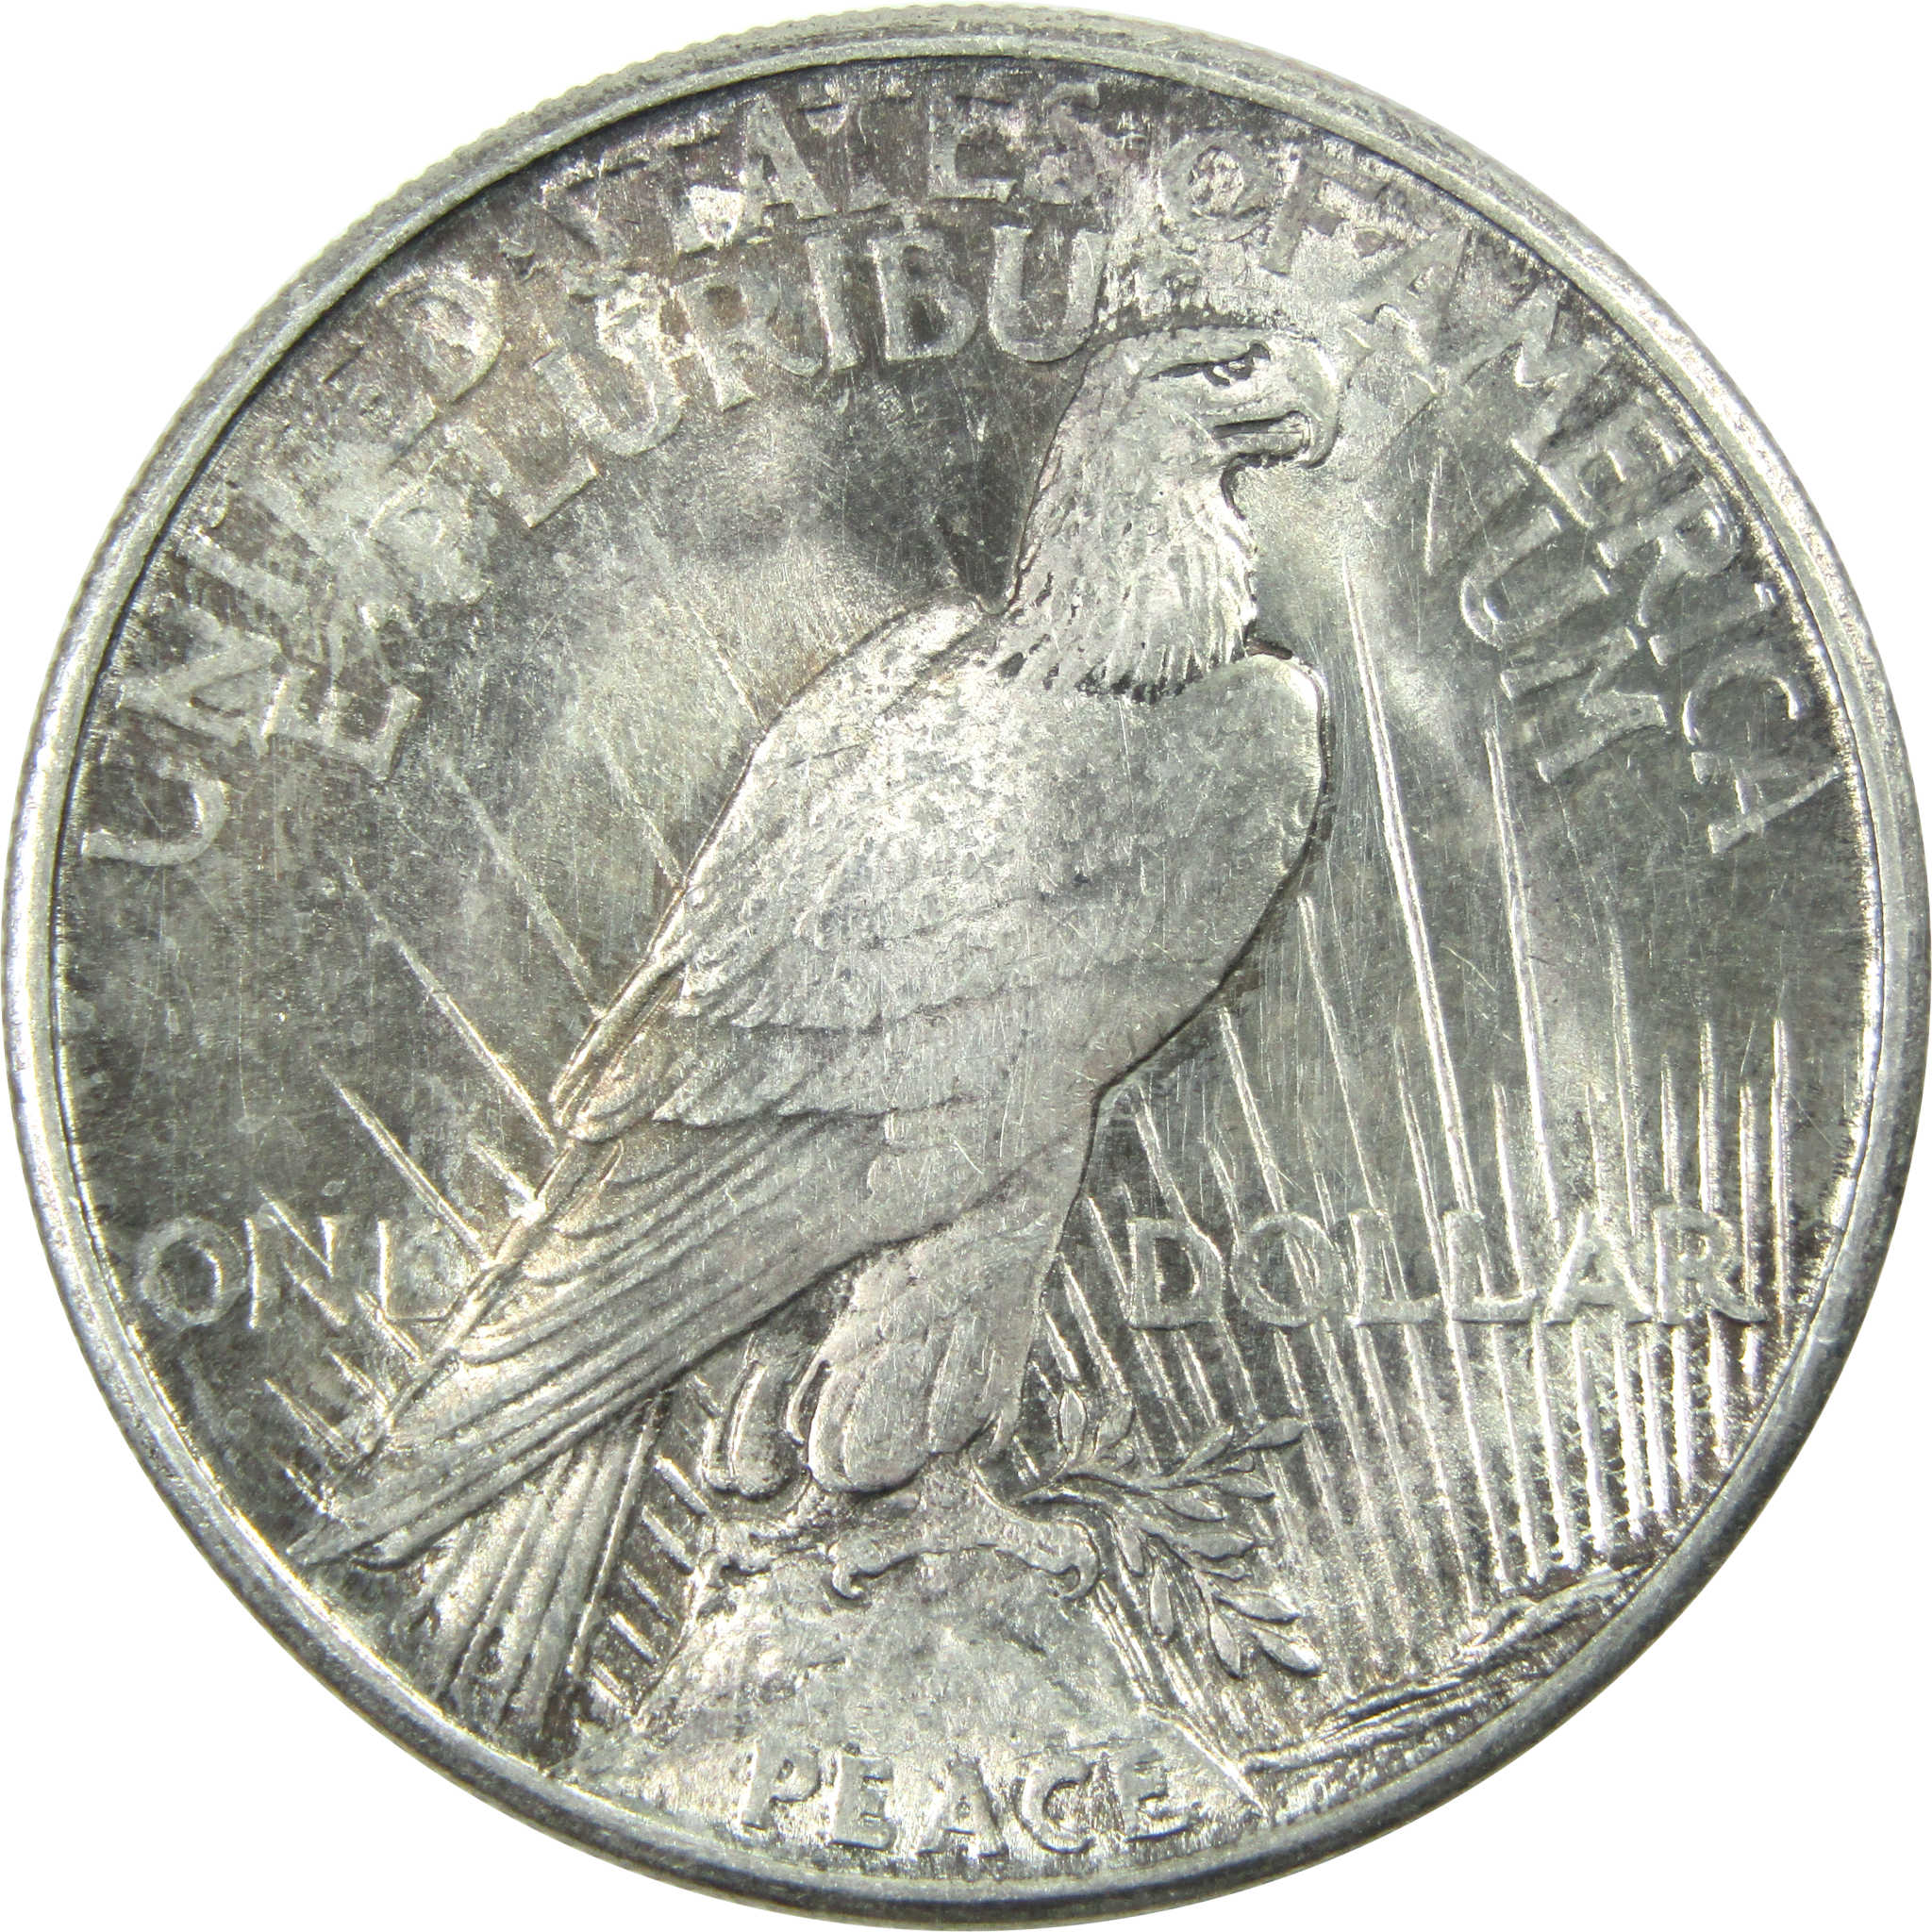 1921 High Relief Peace Dollar AU Details Silver $1 Coin SKU:I13813